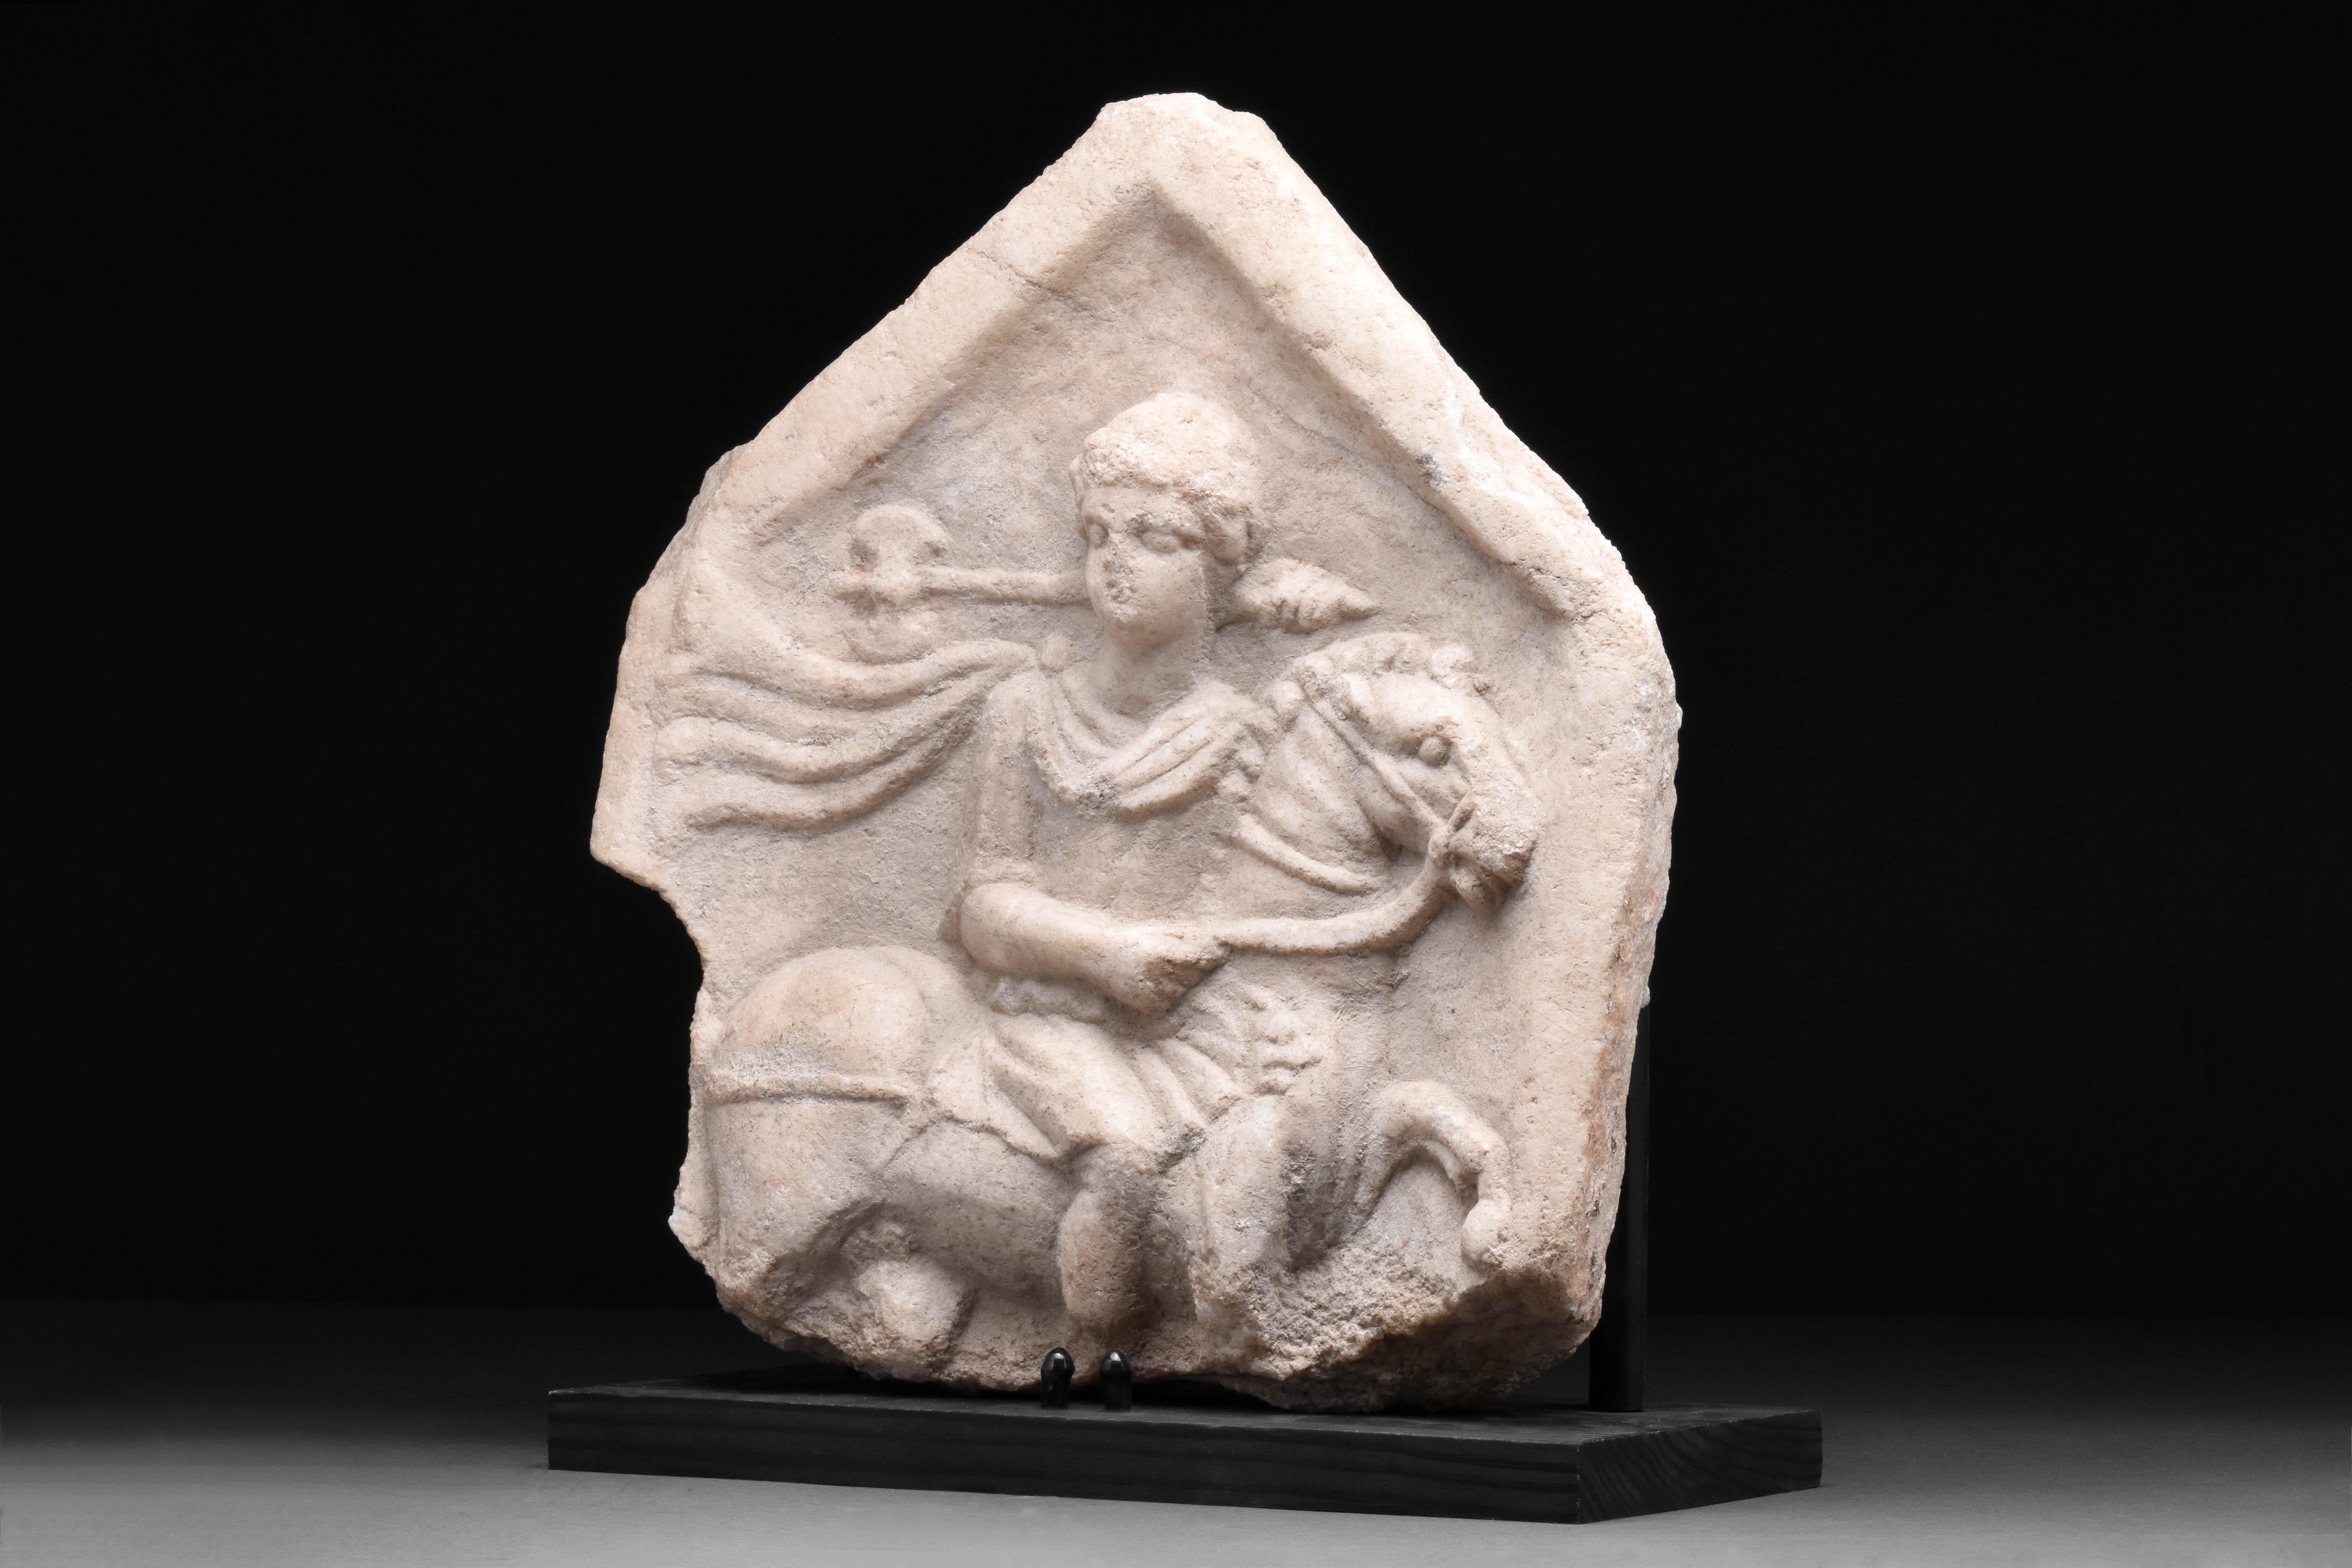 Circa Early 1st Century BC 

A magnificent ancient Roman marble relief stele of pentagon shape, finely carved with the relief of a young Apollo on horseback, holding doubled bitted axe called a Labrys. Apollo is depicting with parted lips, the